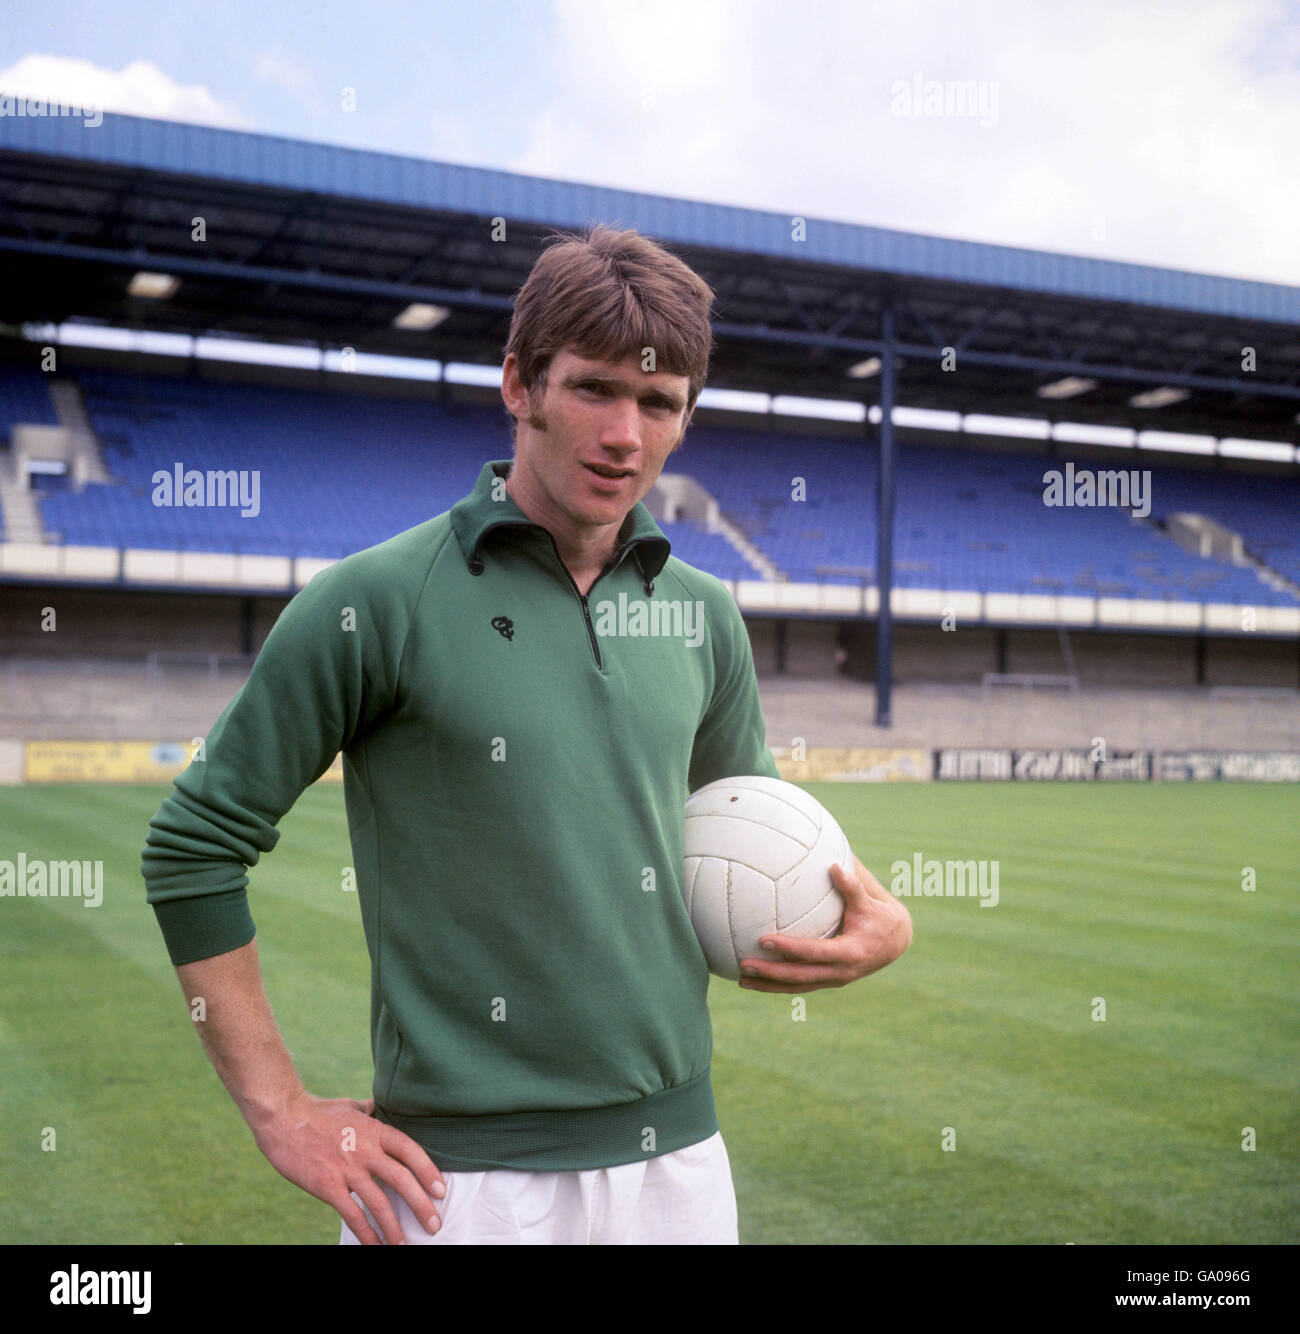 Fußball - Football League Division Two - Queen's Park Rangers Photocall. Mike Kelly, Queen's Park Rangers 1968/69 Stockfoto